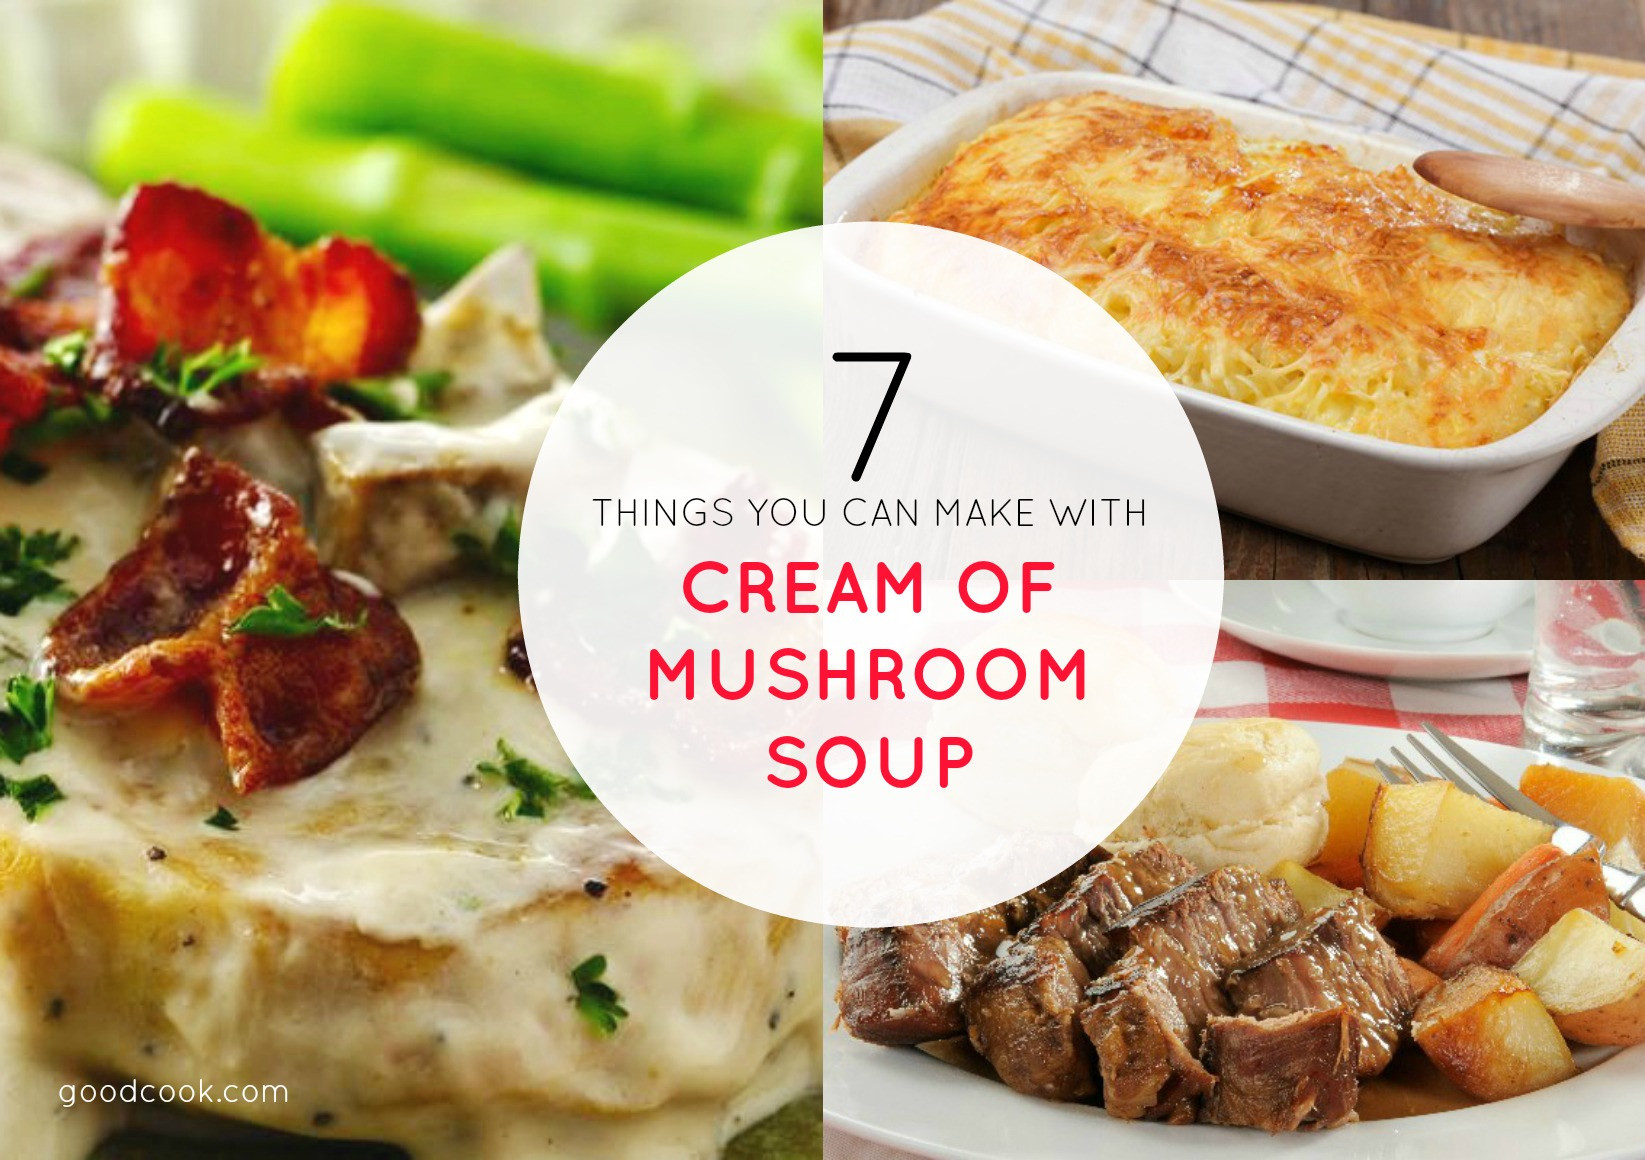 Recipes Using Cream Of Mushroom Soup And Chicken
 7 Recipes You Can Make with a Can of Cream of Mushroom